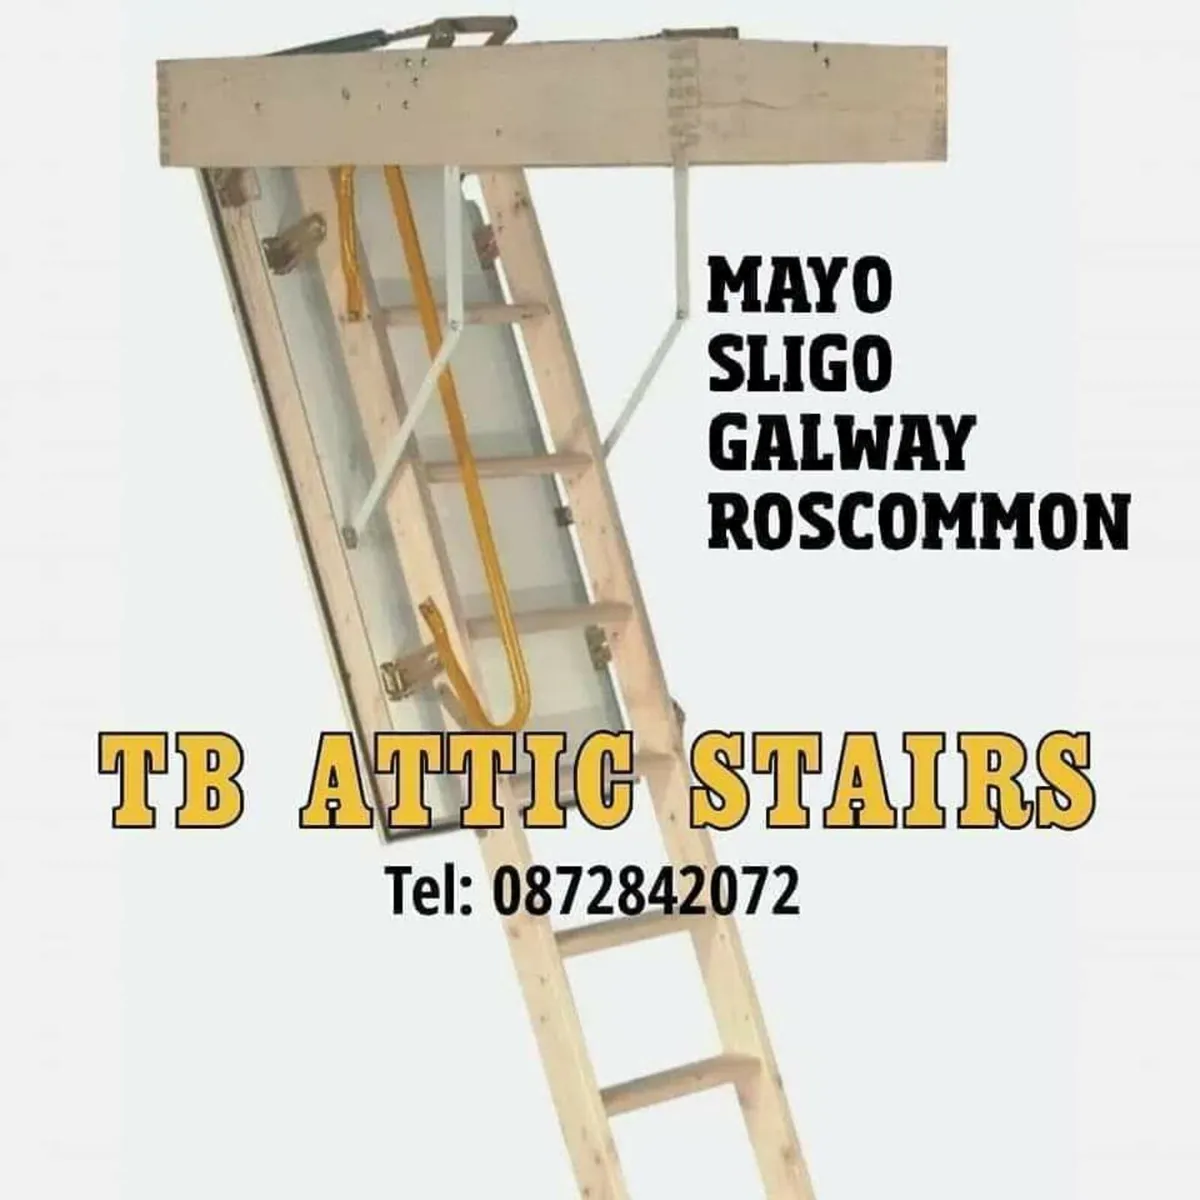 Insulated Attic Stairs